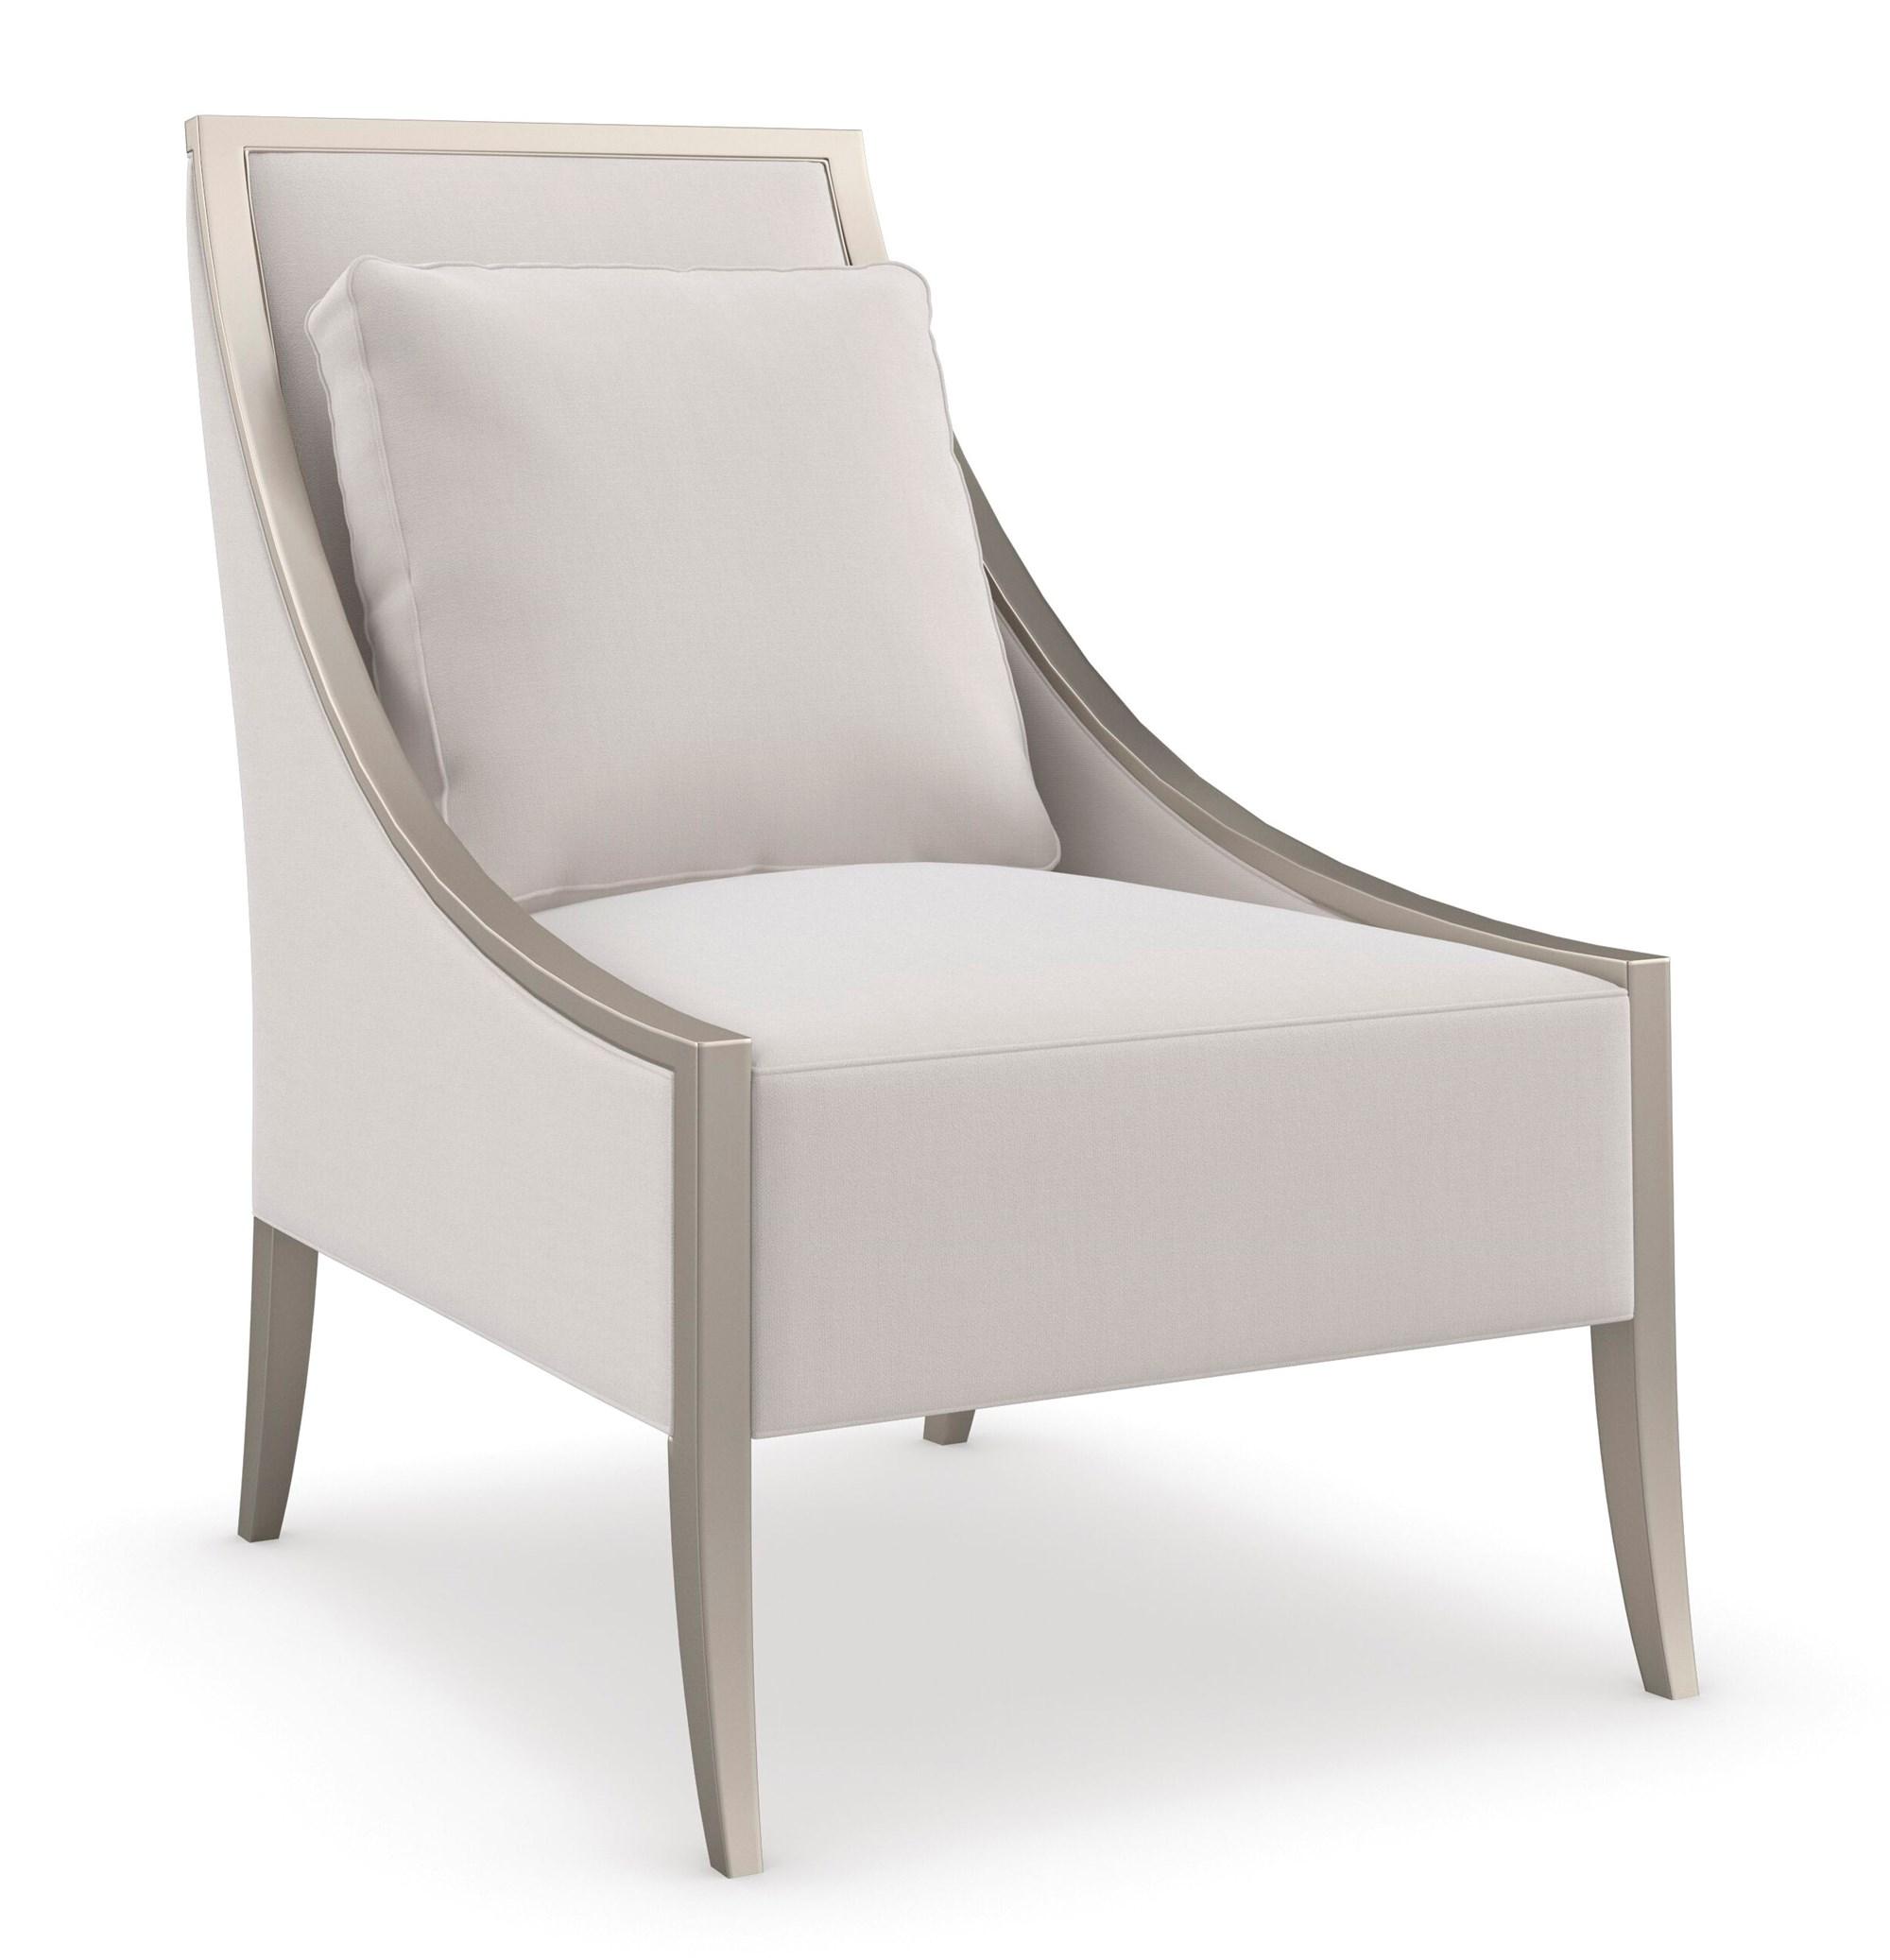 Contemporary Arm Chairs A FINE LINE UPH-021-133-A in Light Gray, Silver 